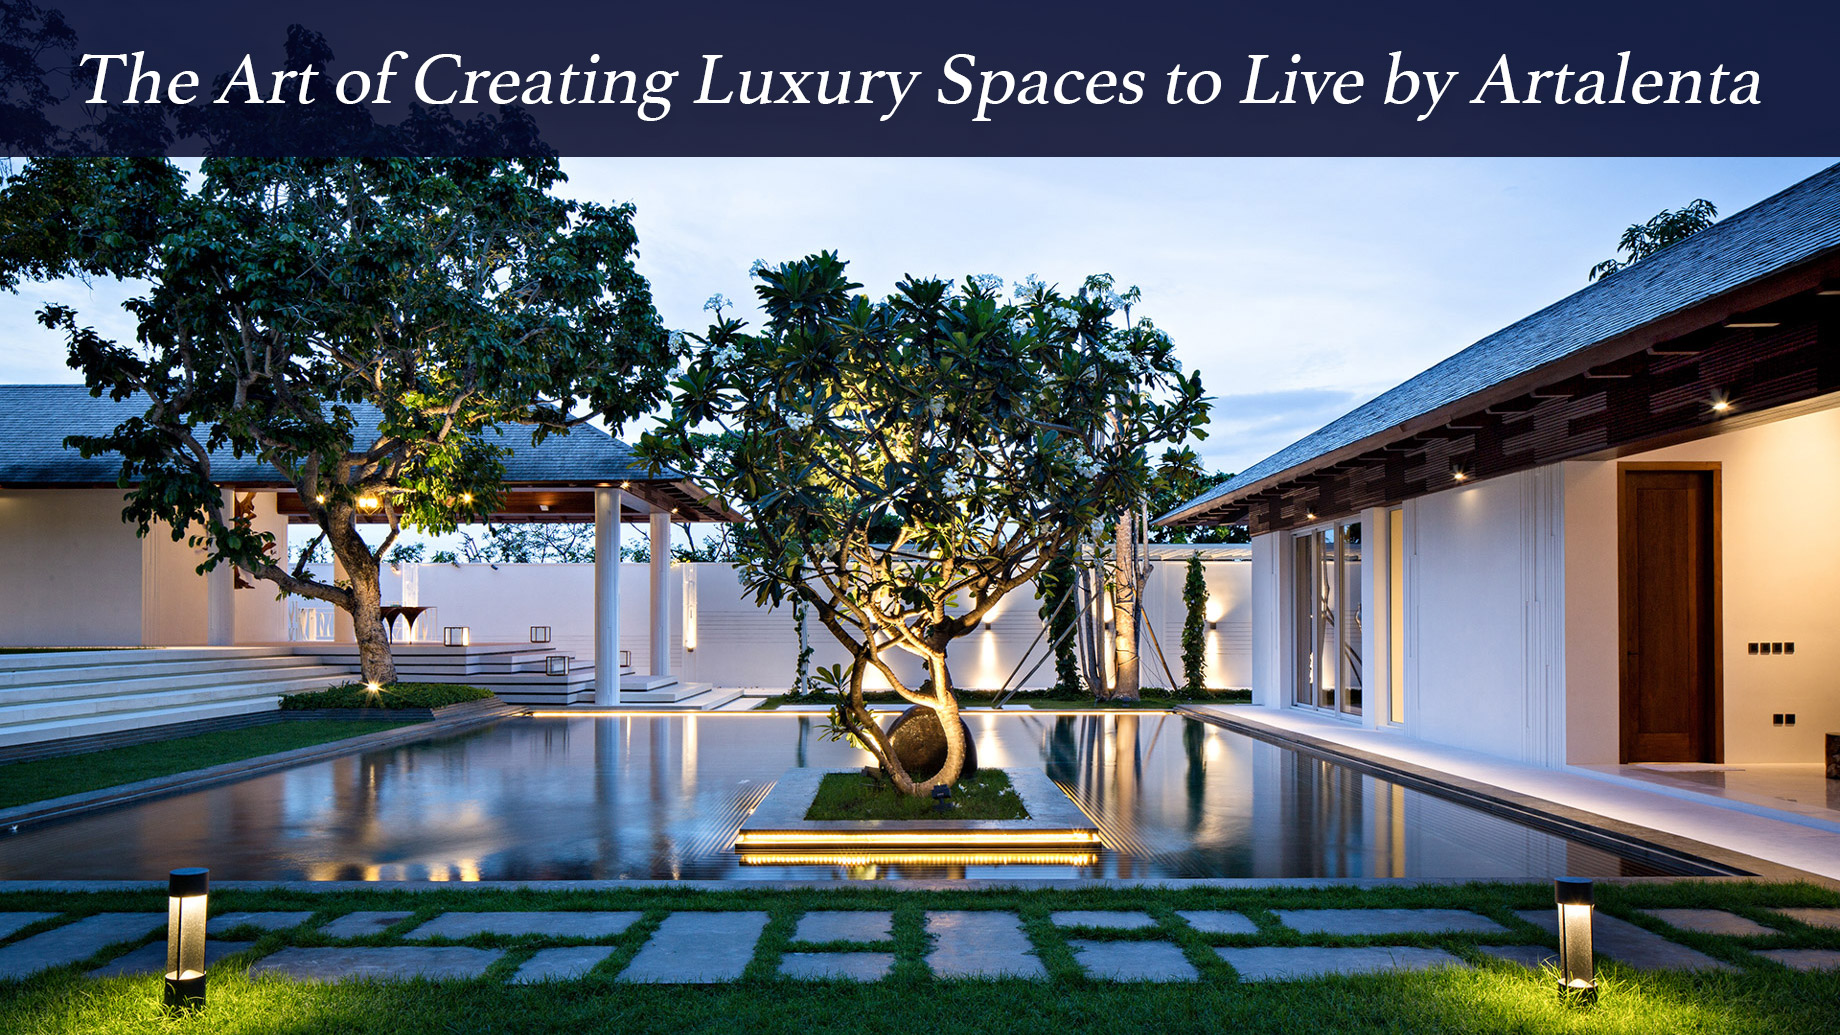 The Art of Creating Luxury Spaces to Live by Artalenta